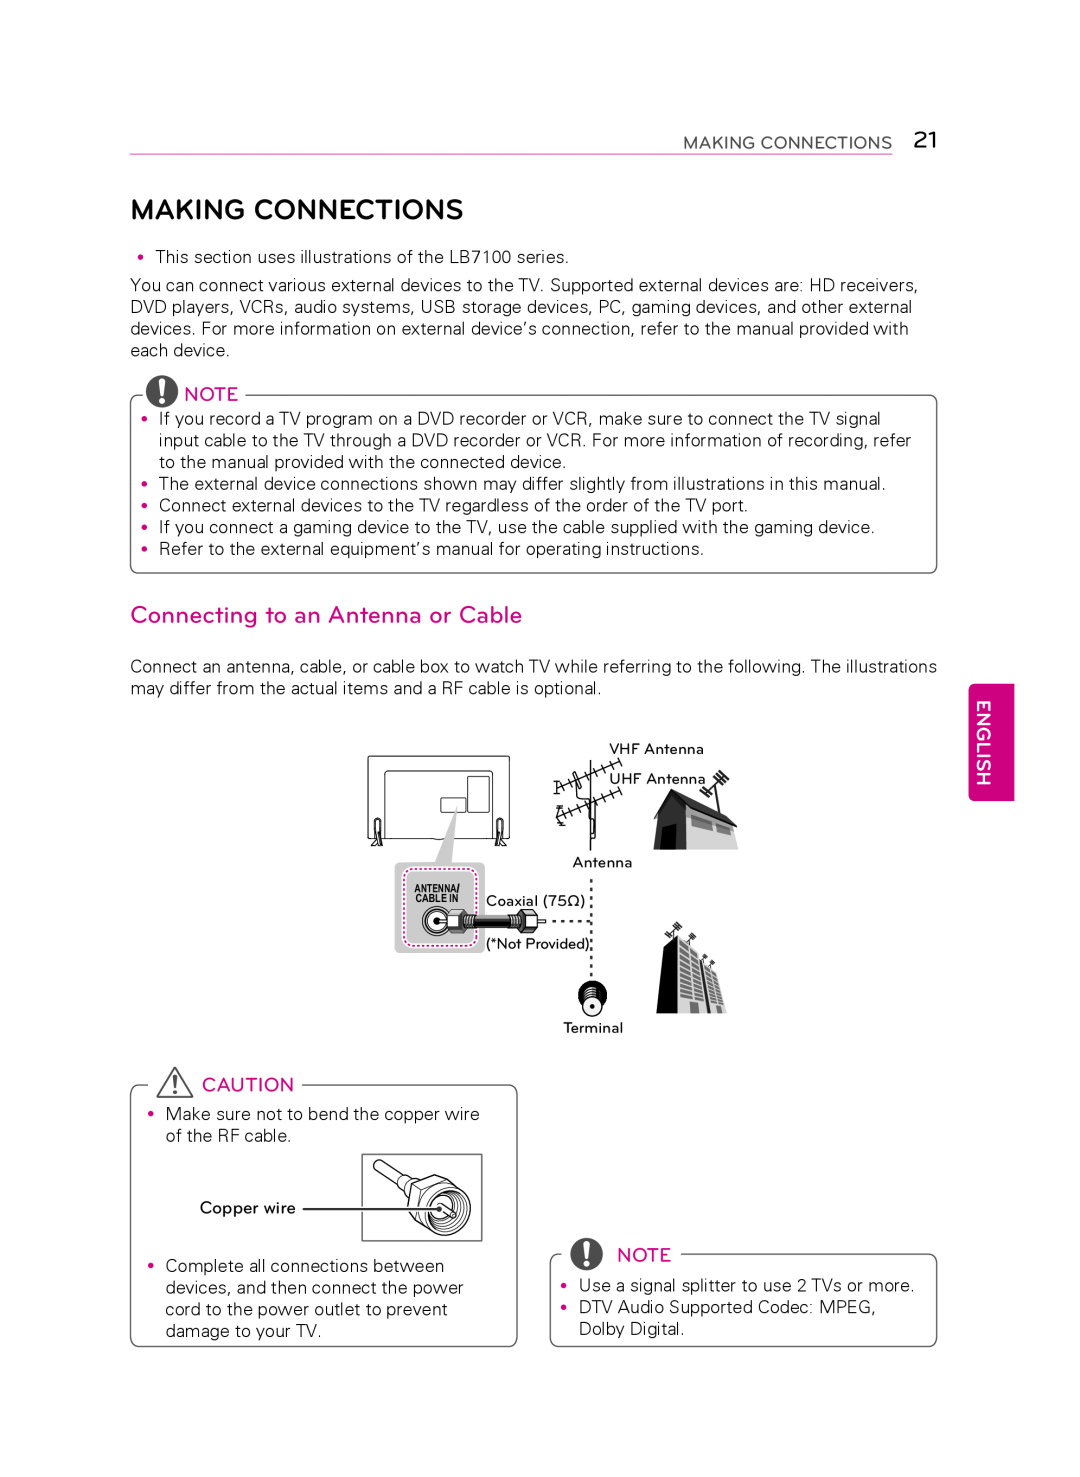 LG Electronics 50LB6300 owner manual Making Connections, Connecting to an Antenna or Cable, English 